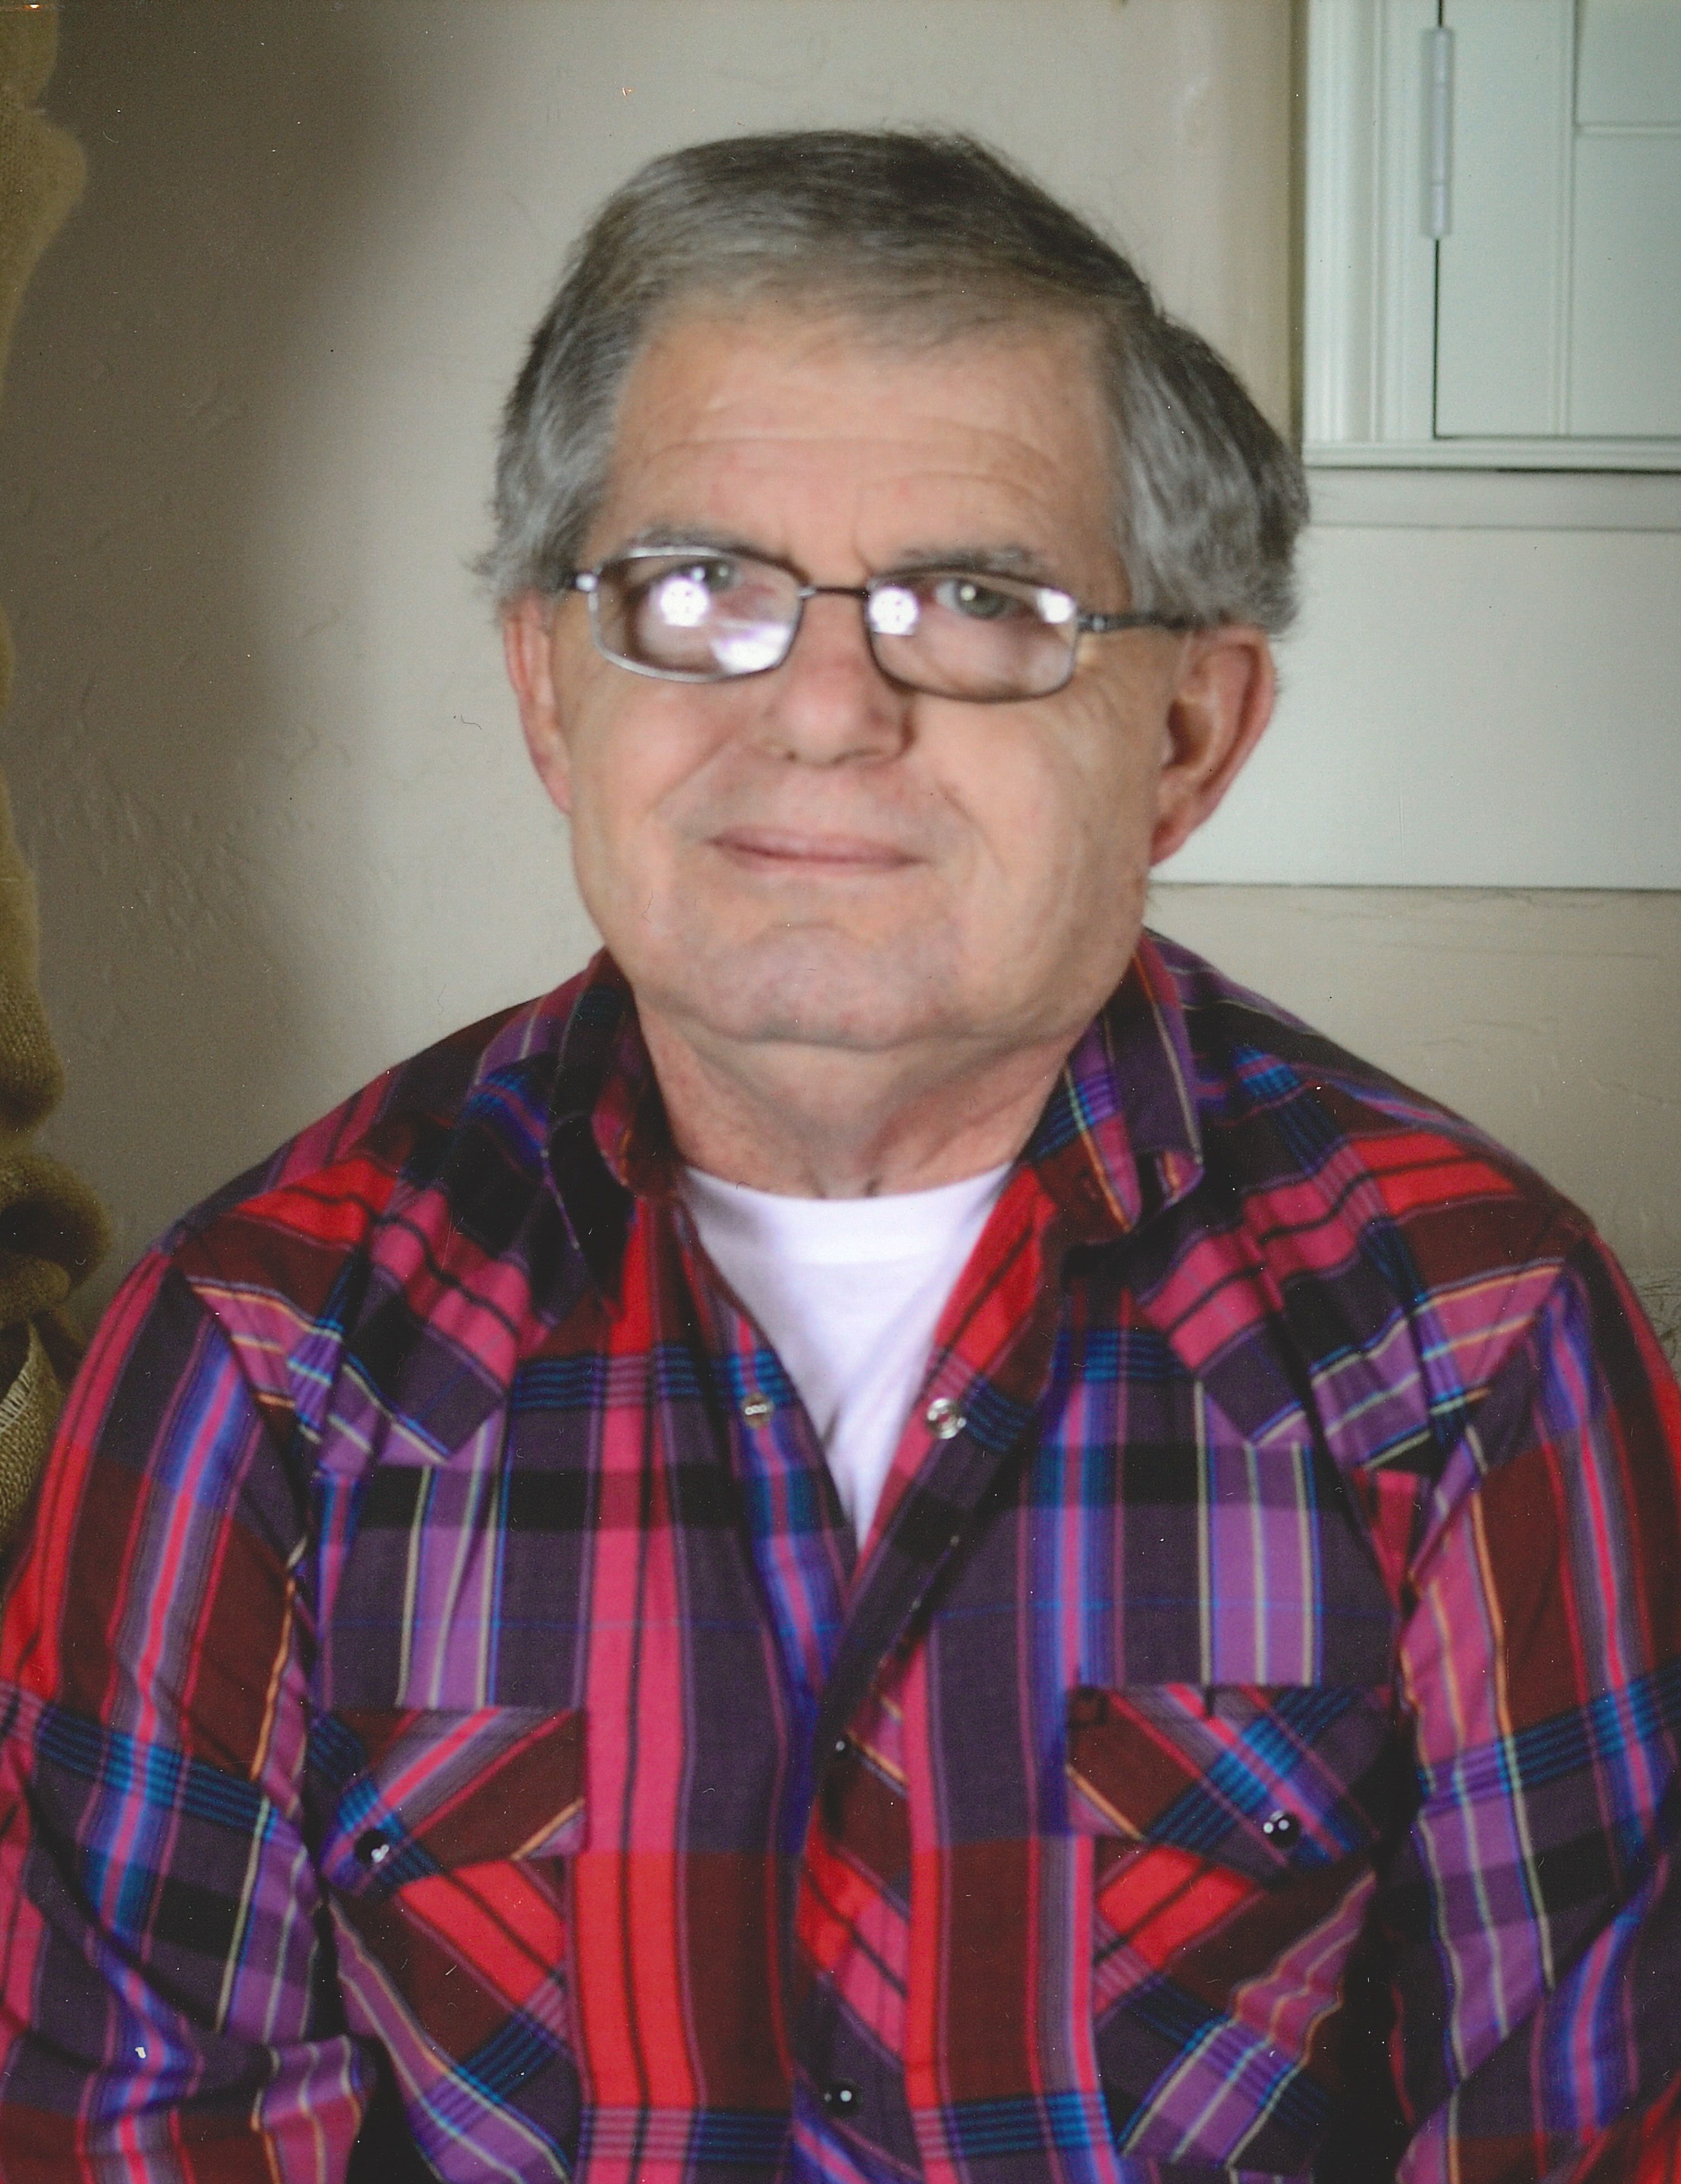 Obituary information for Walter Lee Floyd